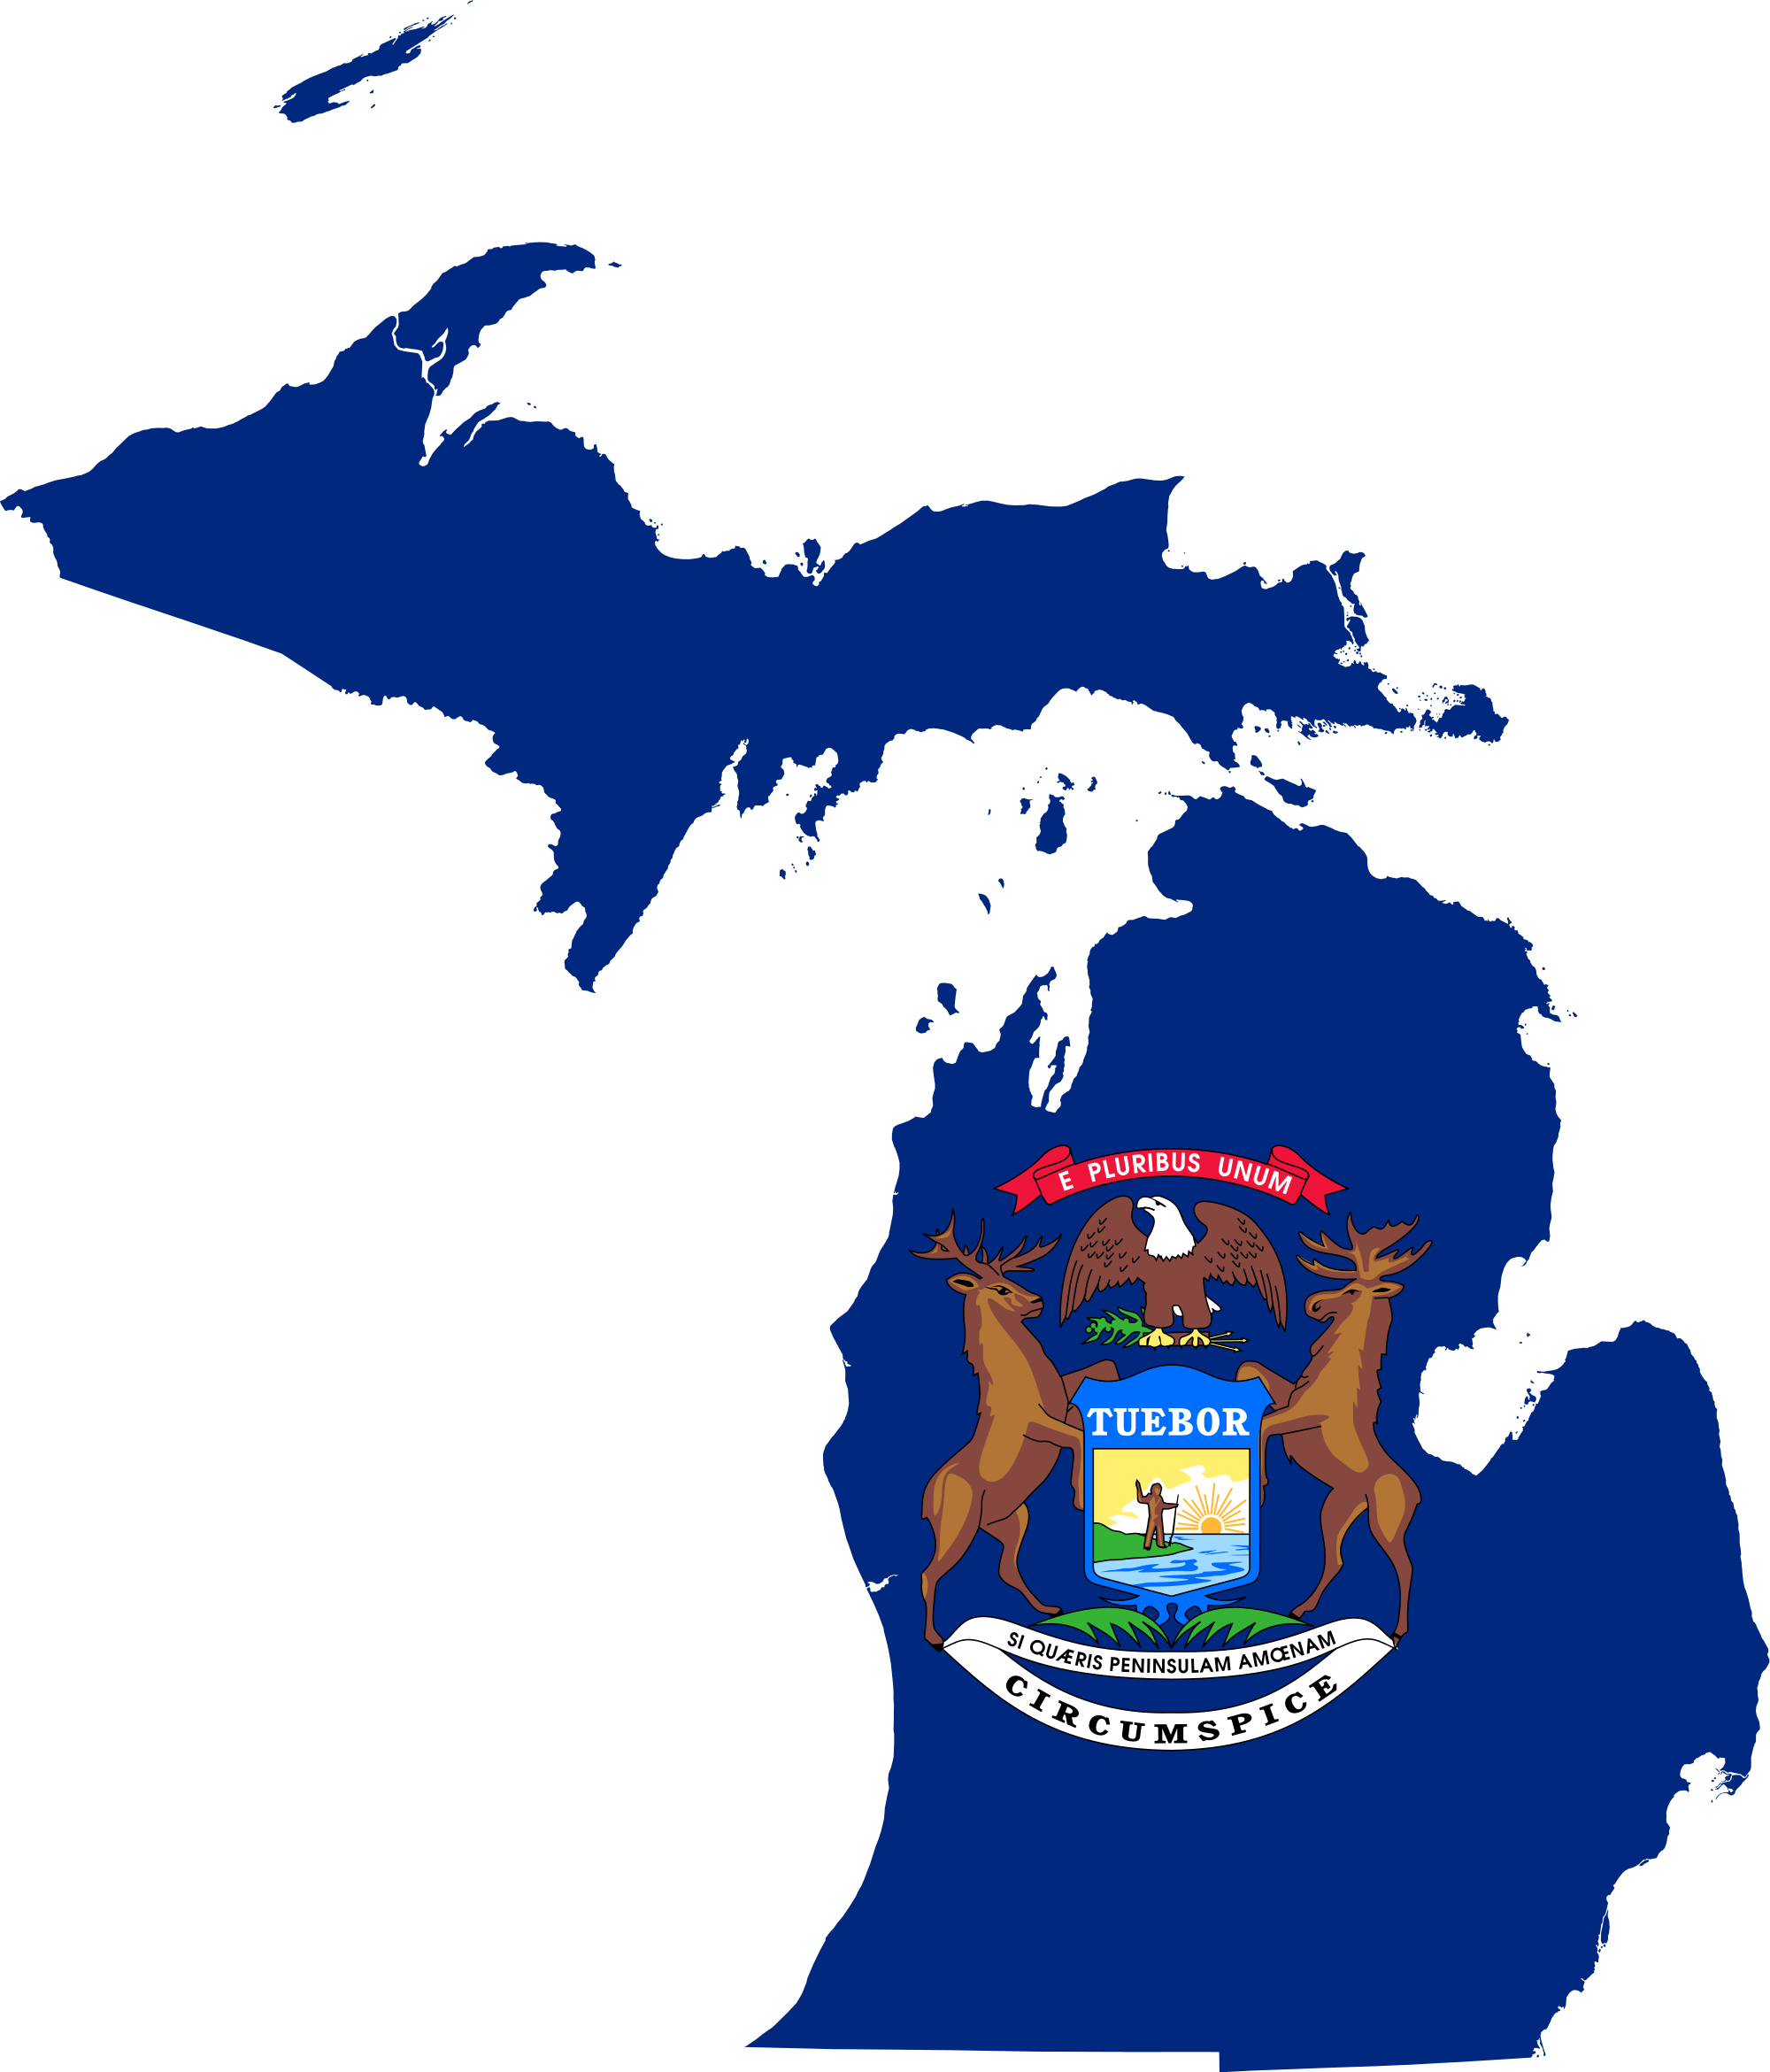 Computer Forensics Services provided in Michigan 